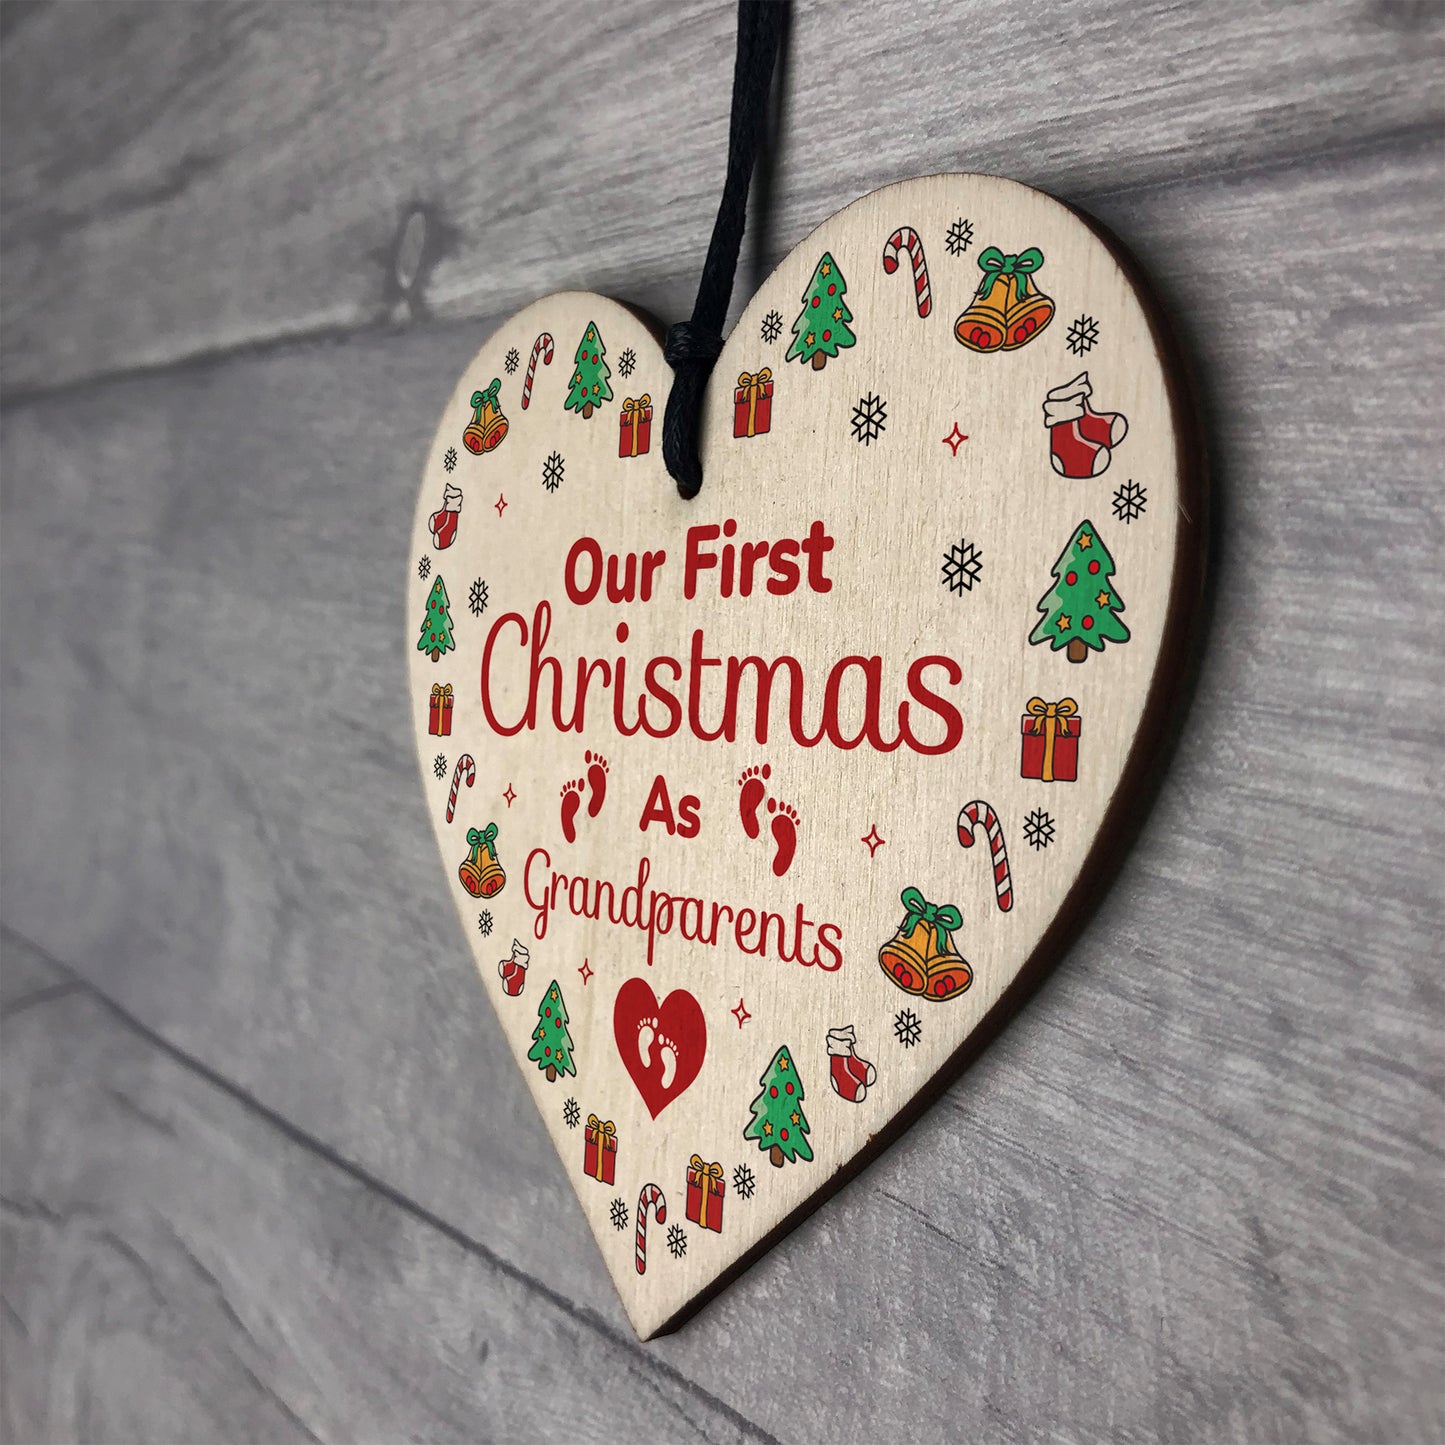 1st Christmas As Grandparents Bauble Wooden Heart Tree Decor